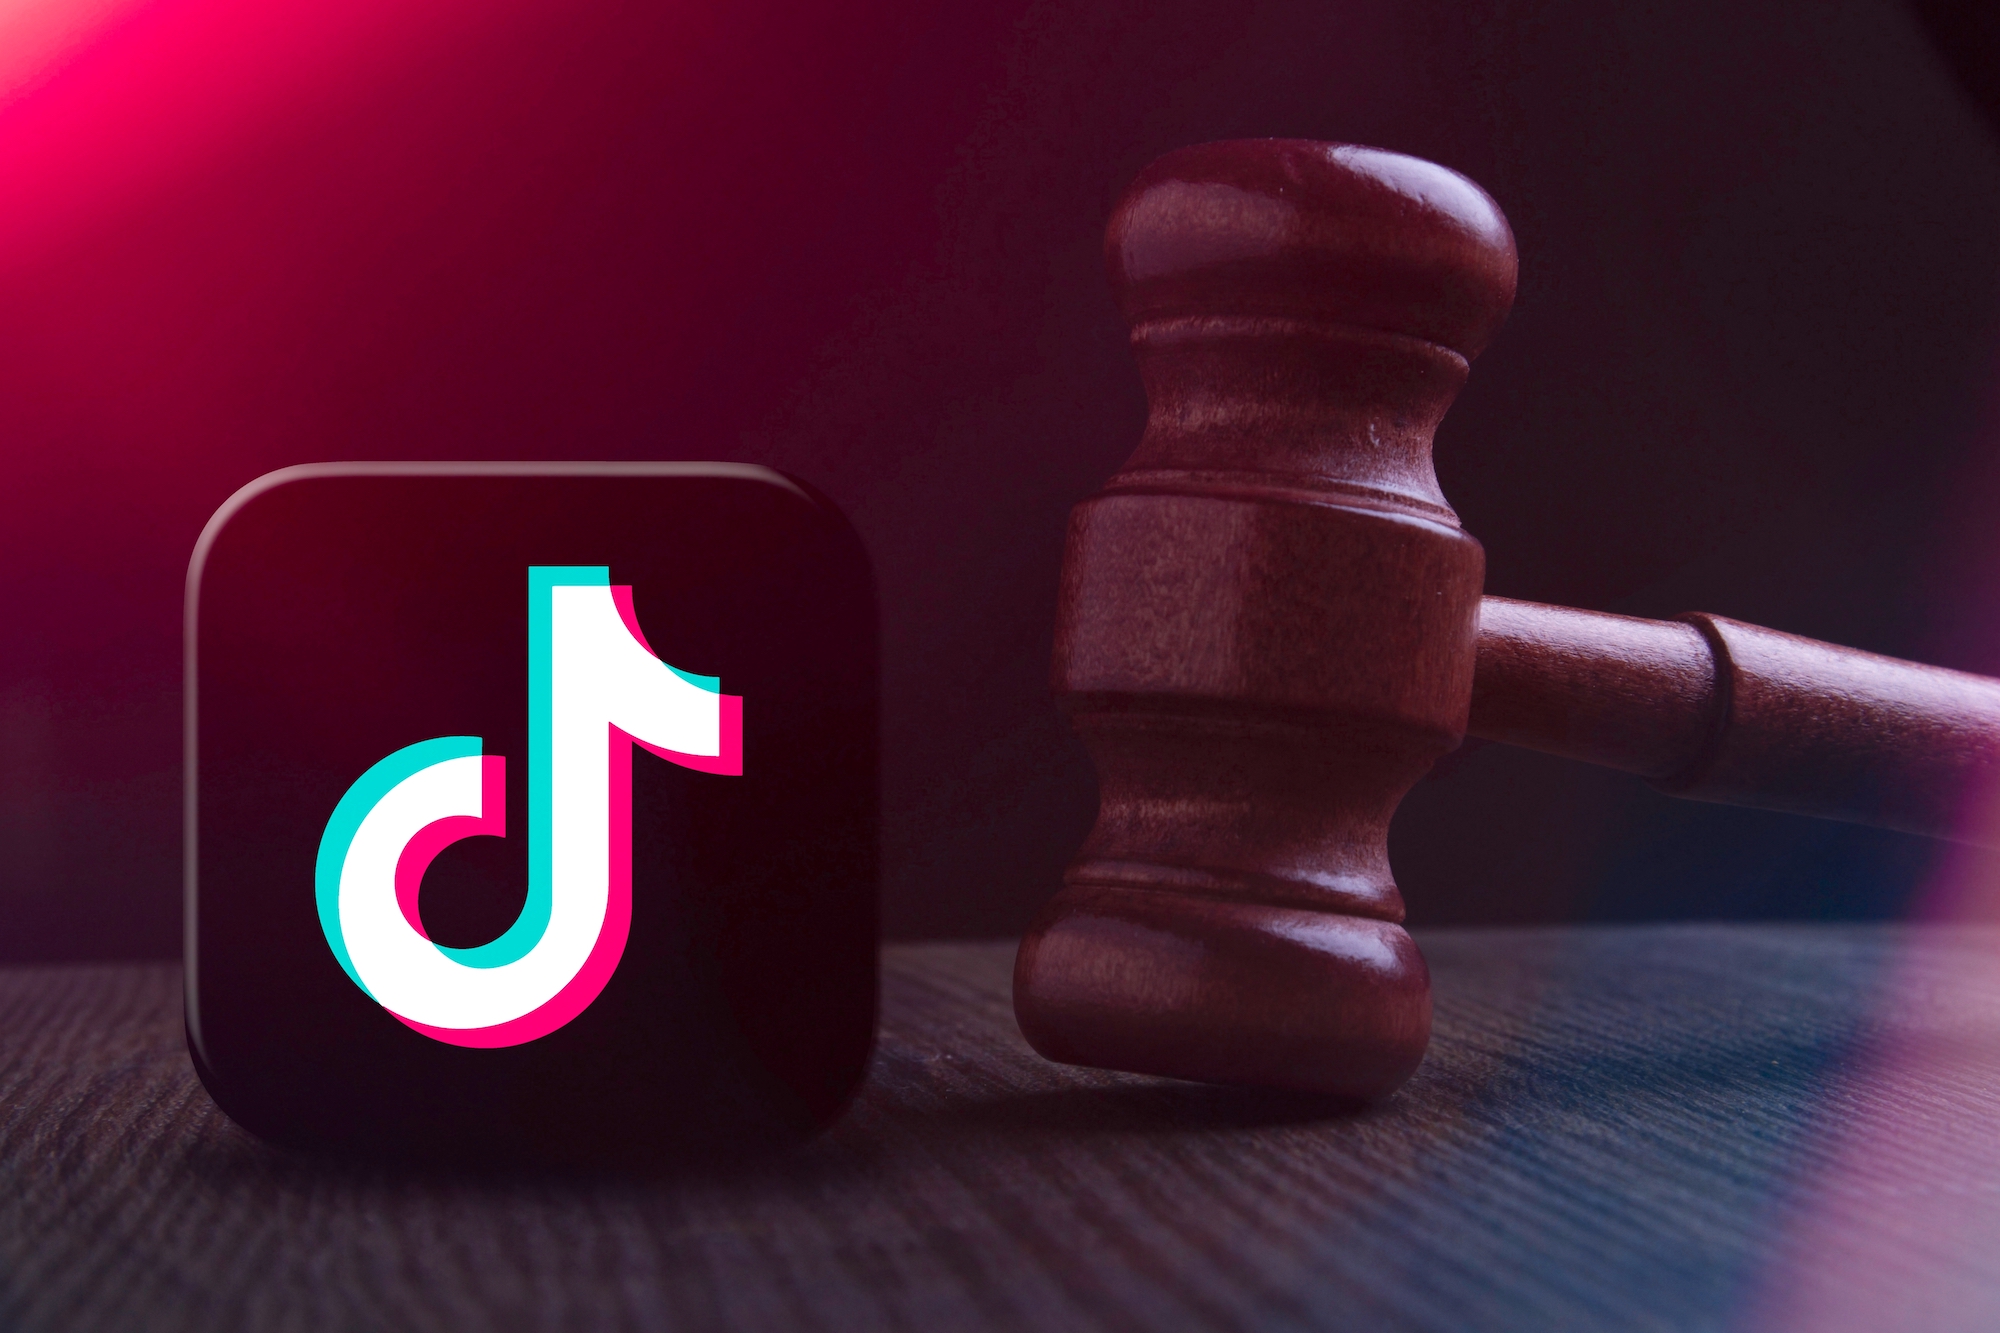 TikTok CEO To Testify In Hearing On Data Privacy And Online Harm Reduction